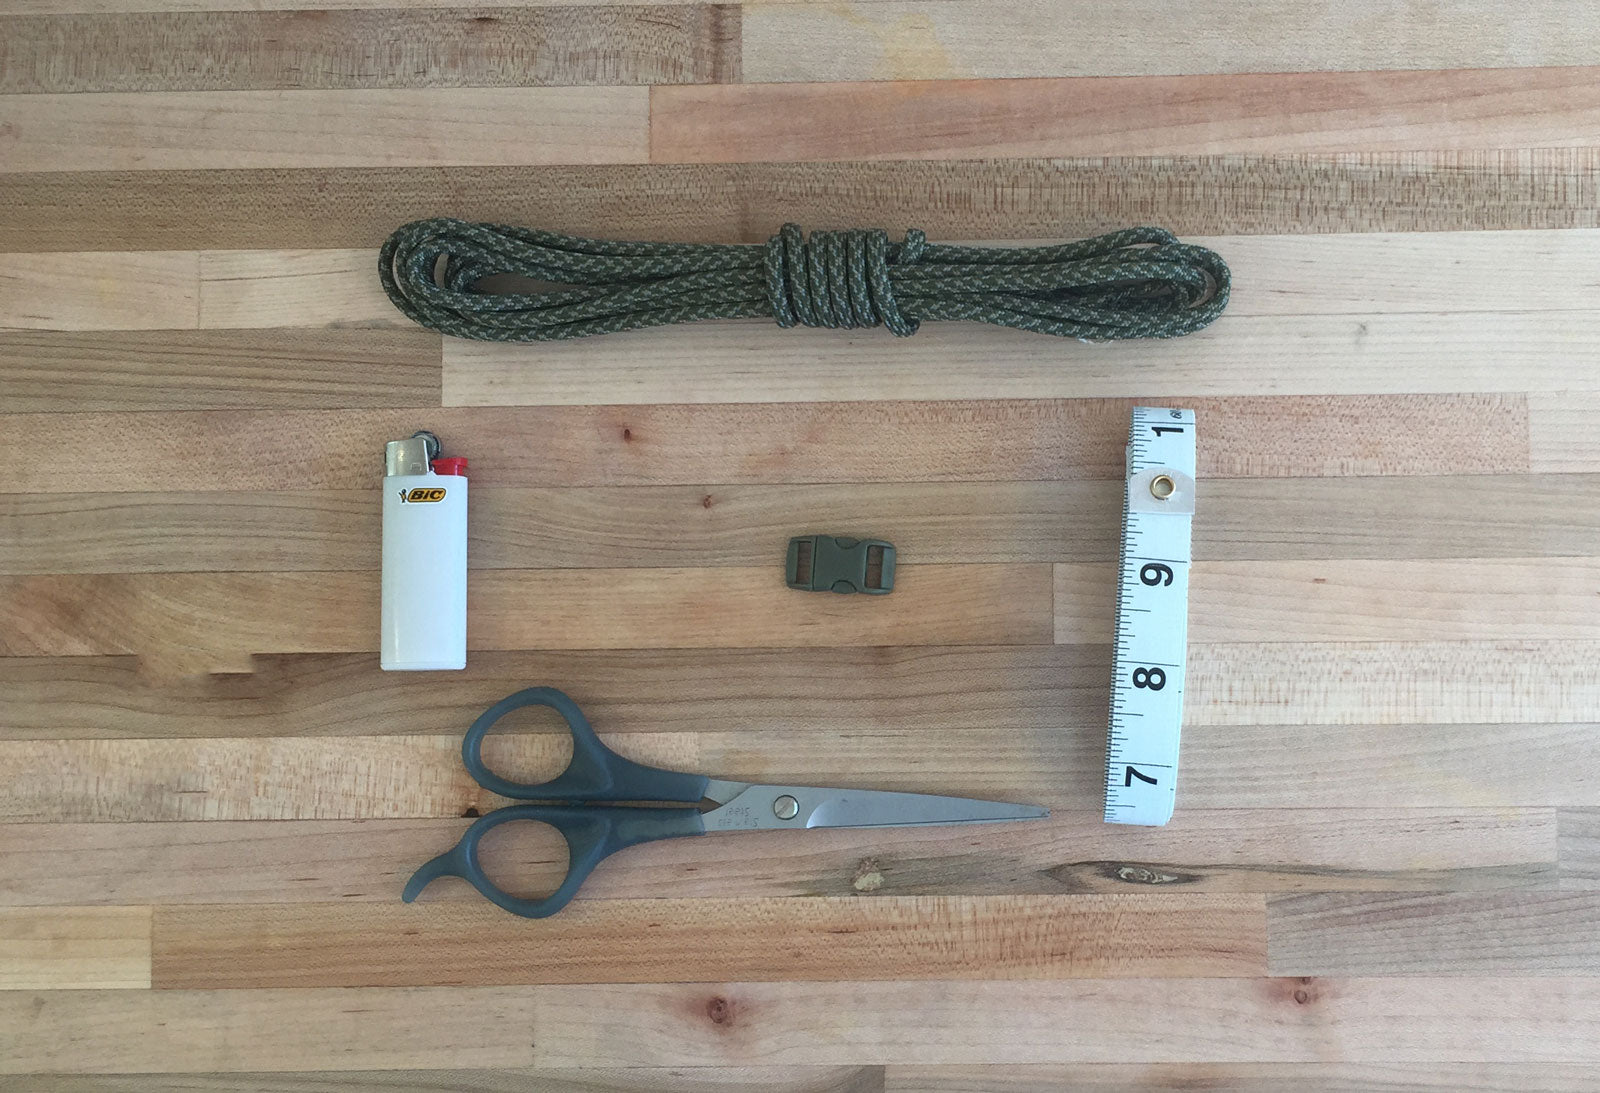 How to Make a Paracord Wilderness Survival Bracelet